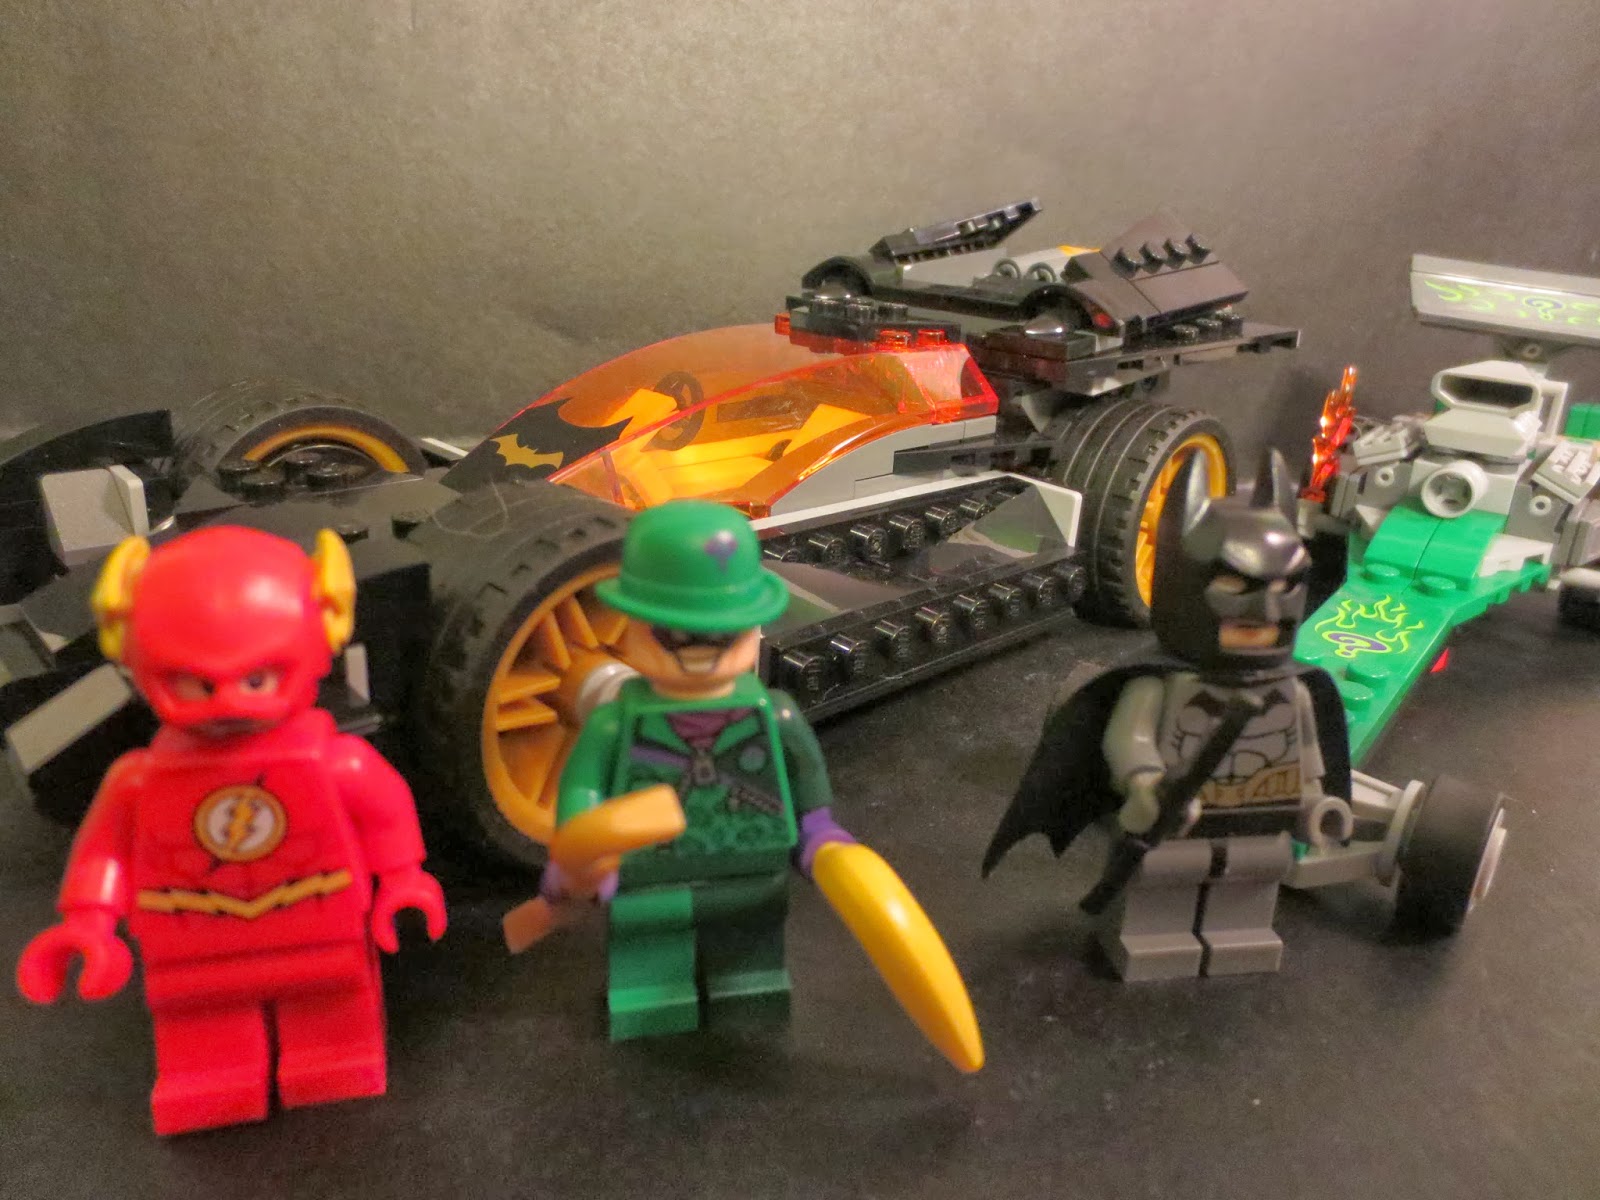 Lego Review: Batman: The Riddler Chase from DC Comcis Superheroes by Lego